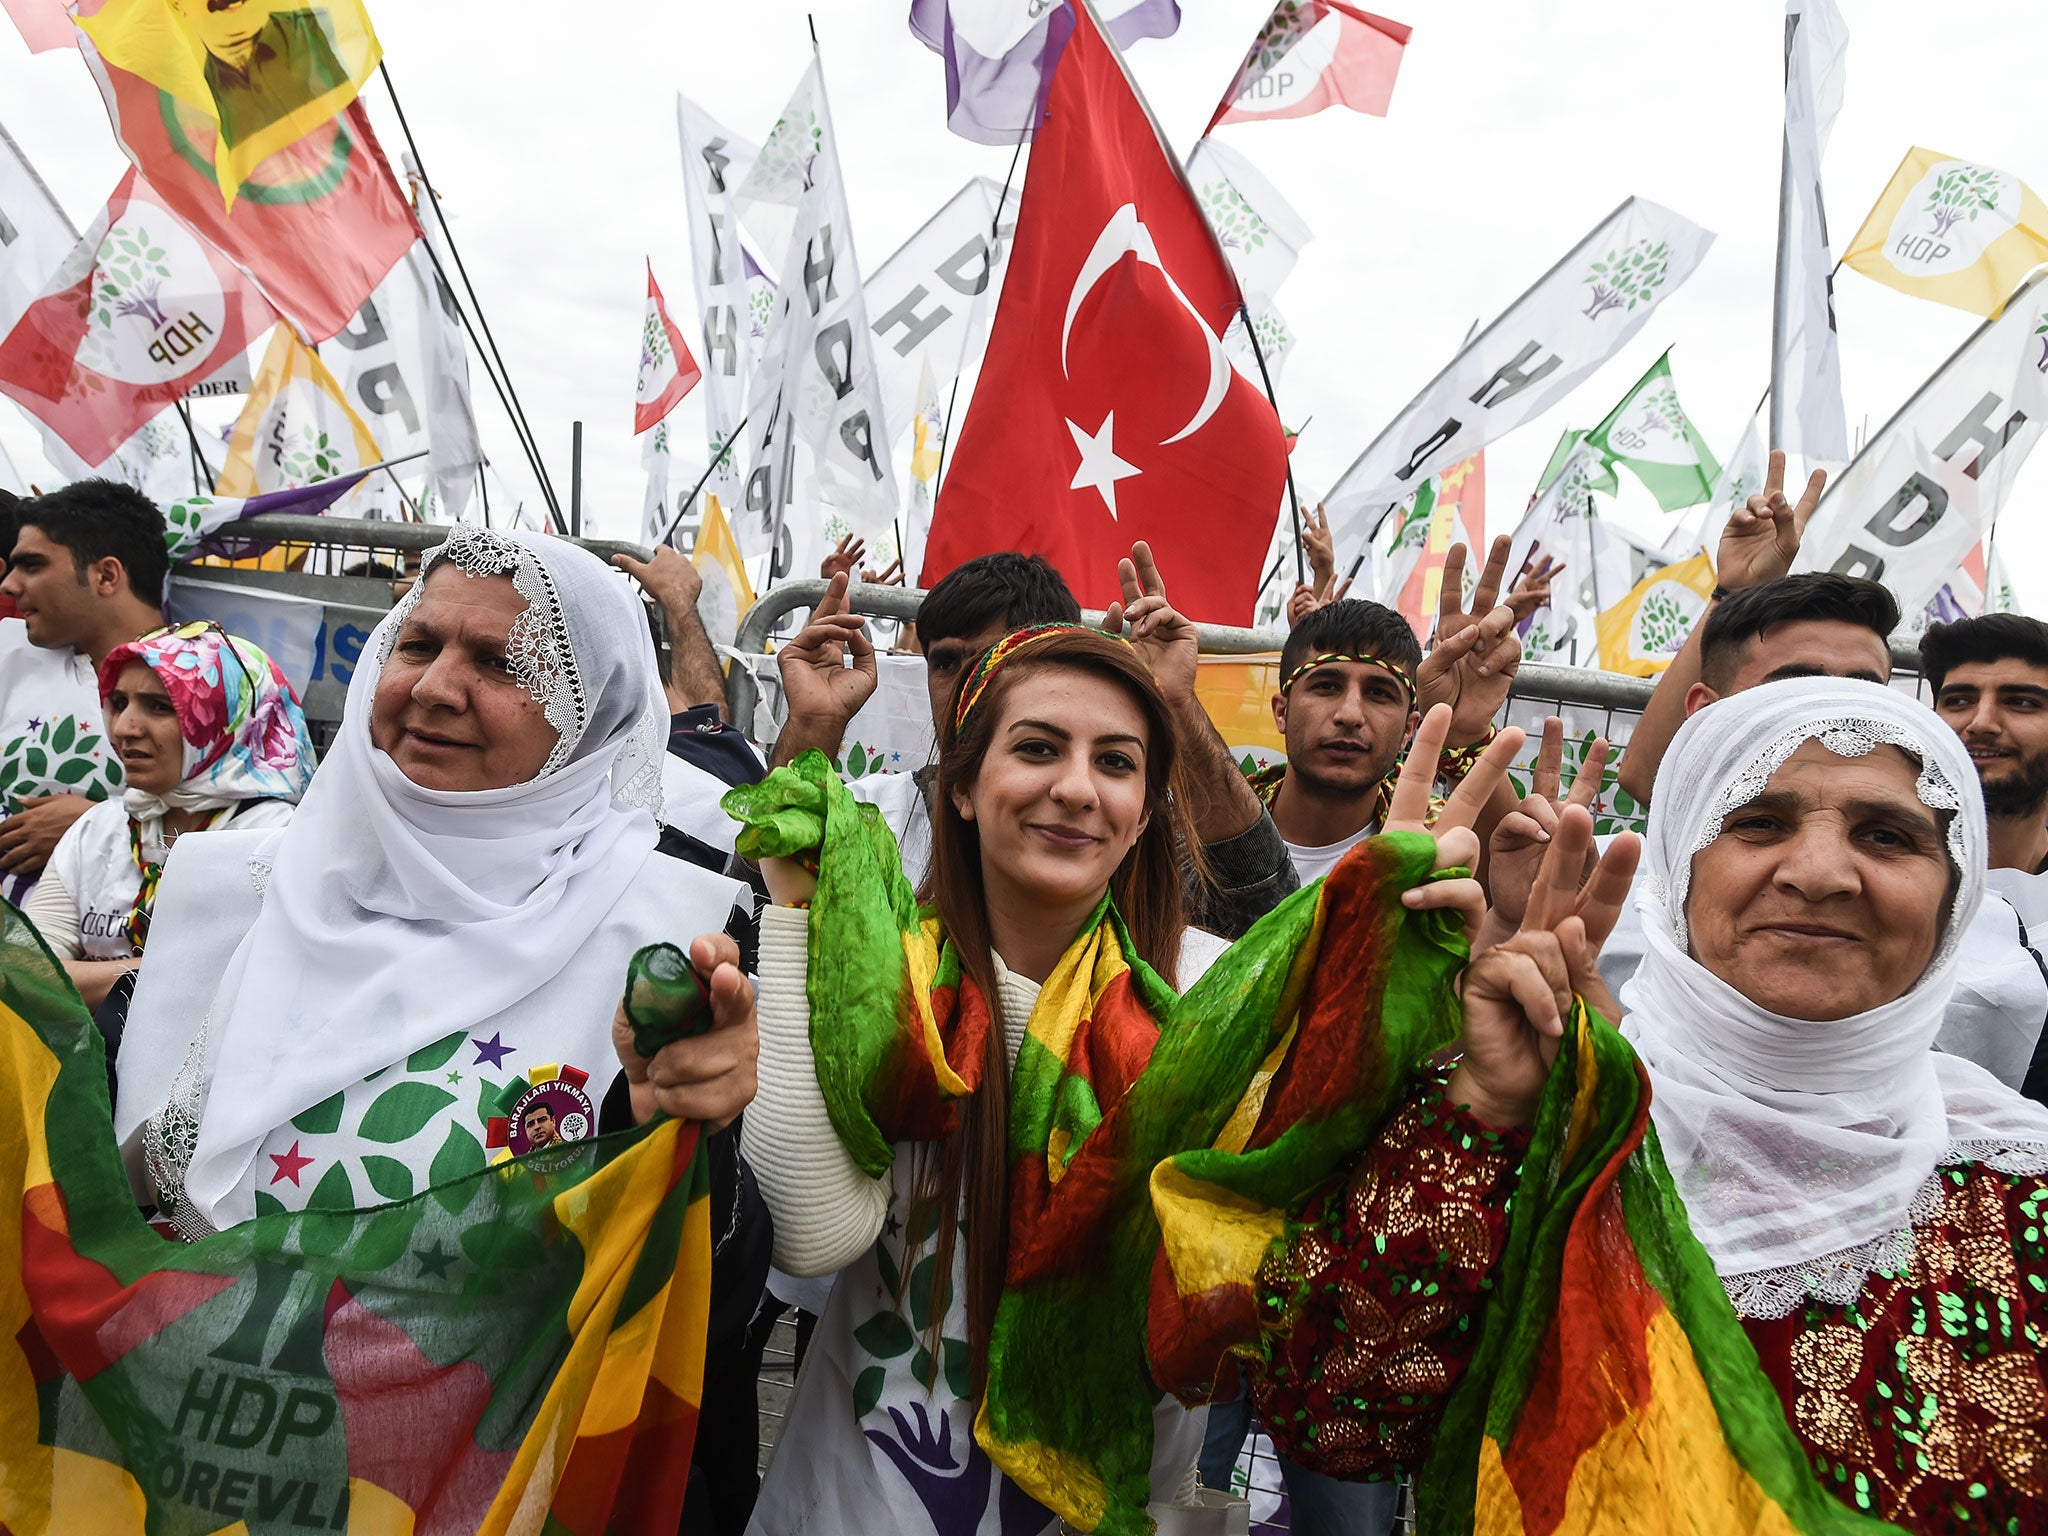 Supporters of the pro-Kurdish People’s Democratic Party cheer and wave flags during a rally ahead of the general election